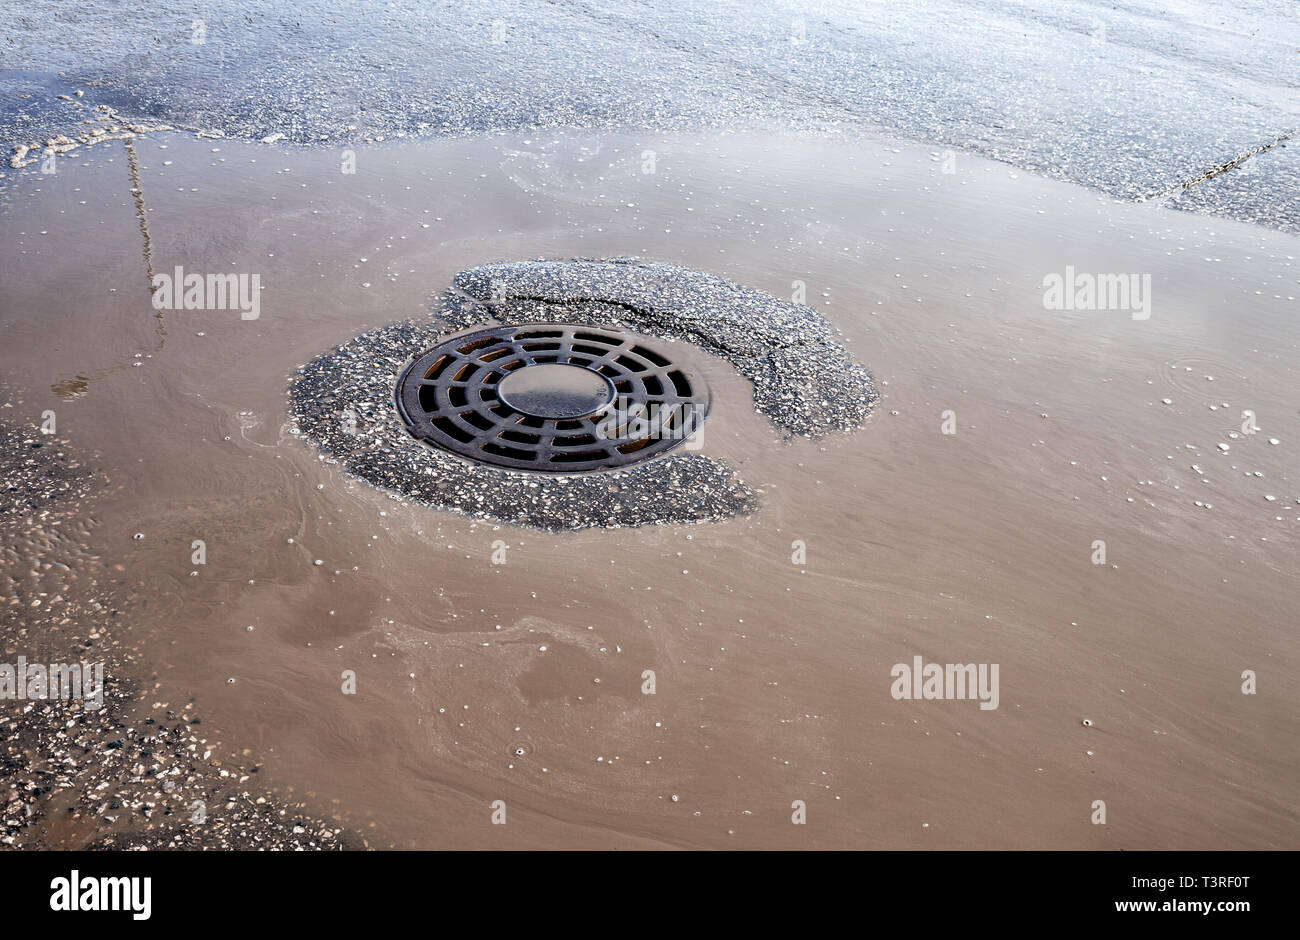 Melted water flows down through the manhole cover on urban asphalt road. Round drainage sewer manhole Stock Photo